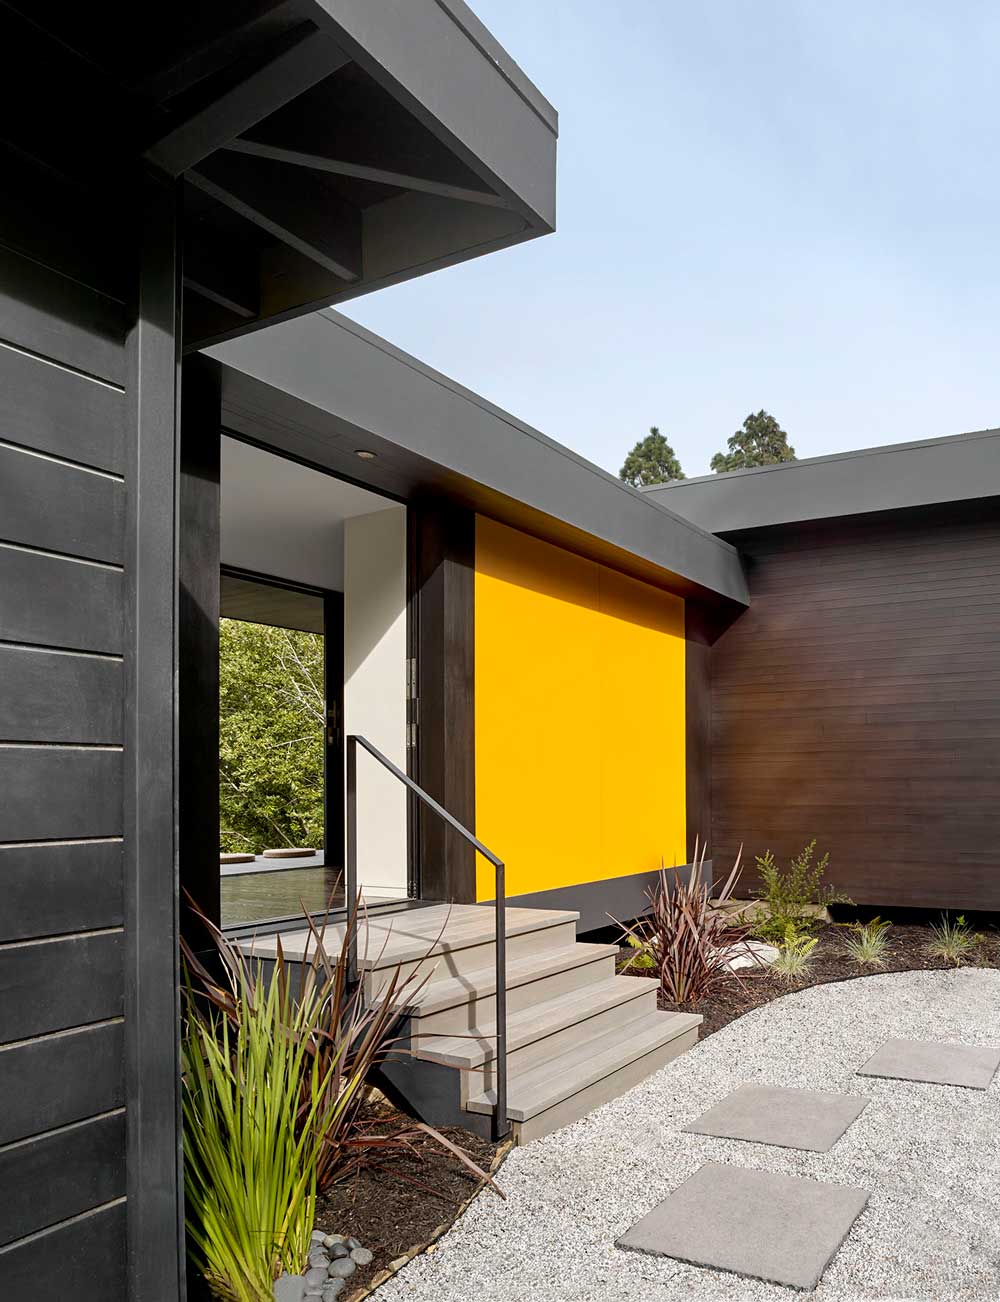 Marin Magazine, Large MDO (medium-density overlay) panels inspired by Japanese shoji screens secrete a pocket door at the front entrance, but instead of a discreet white, they are painted a bright California poppy yellow.